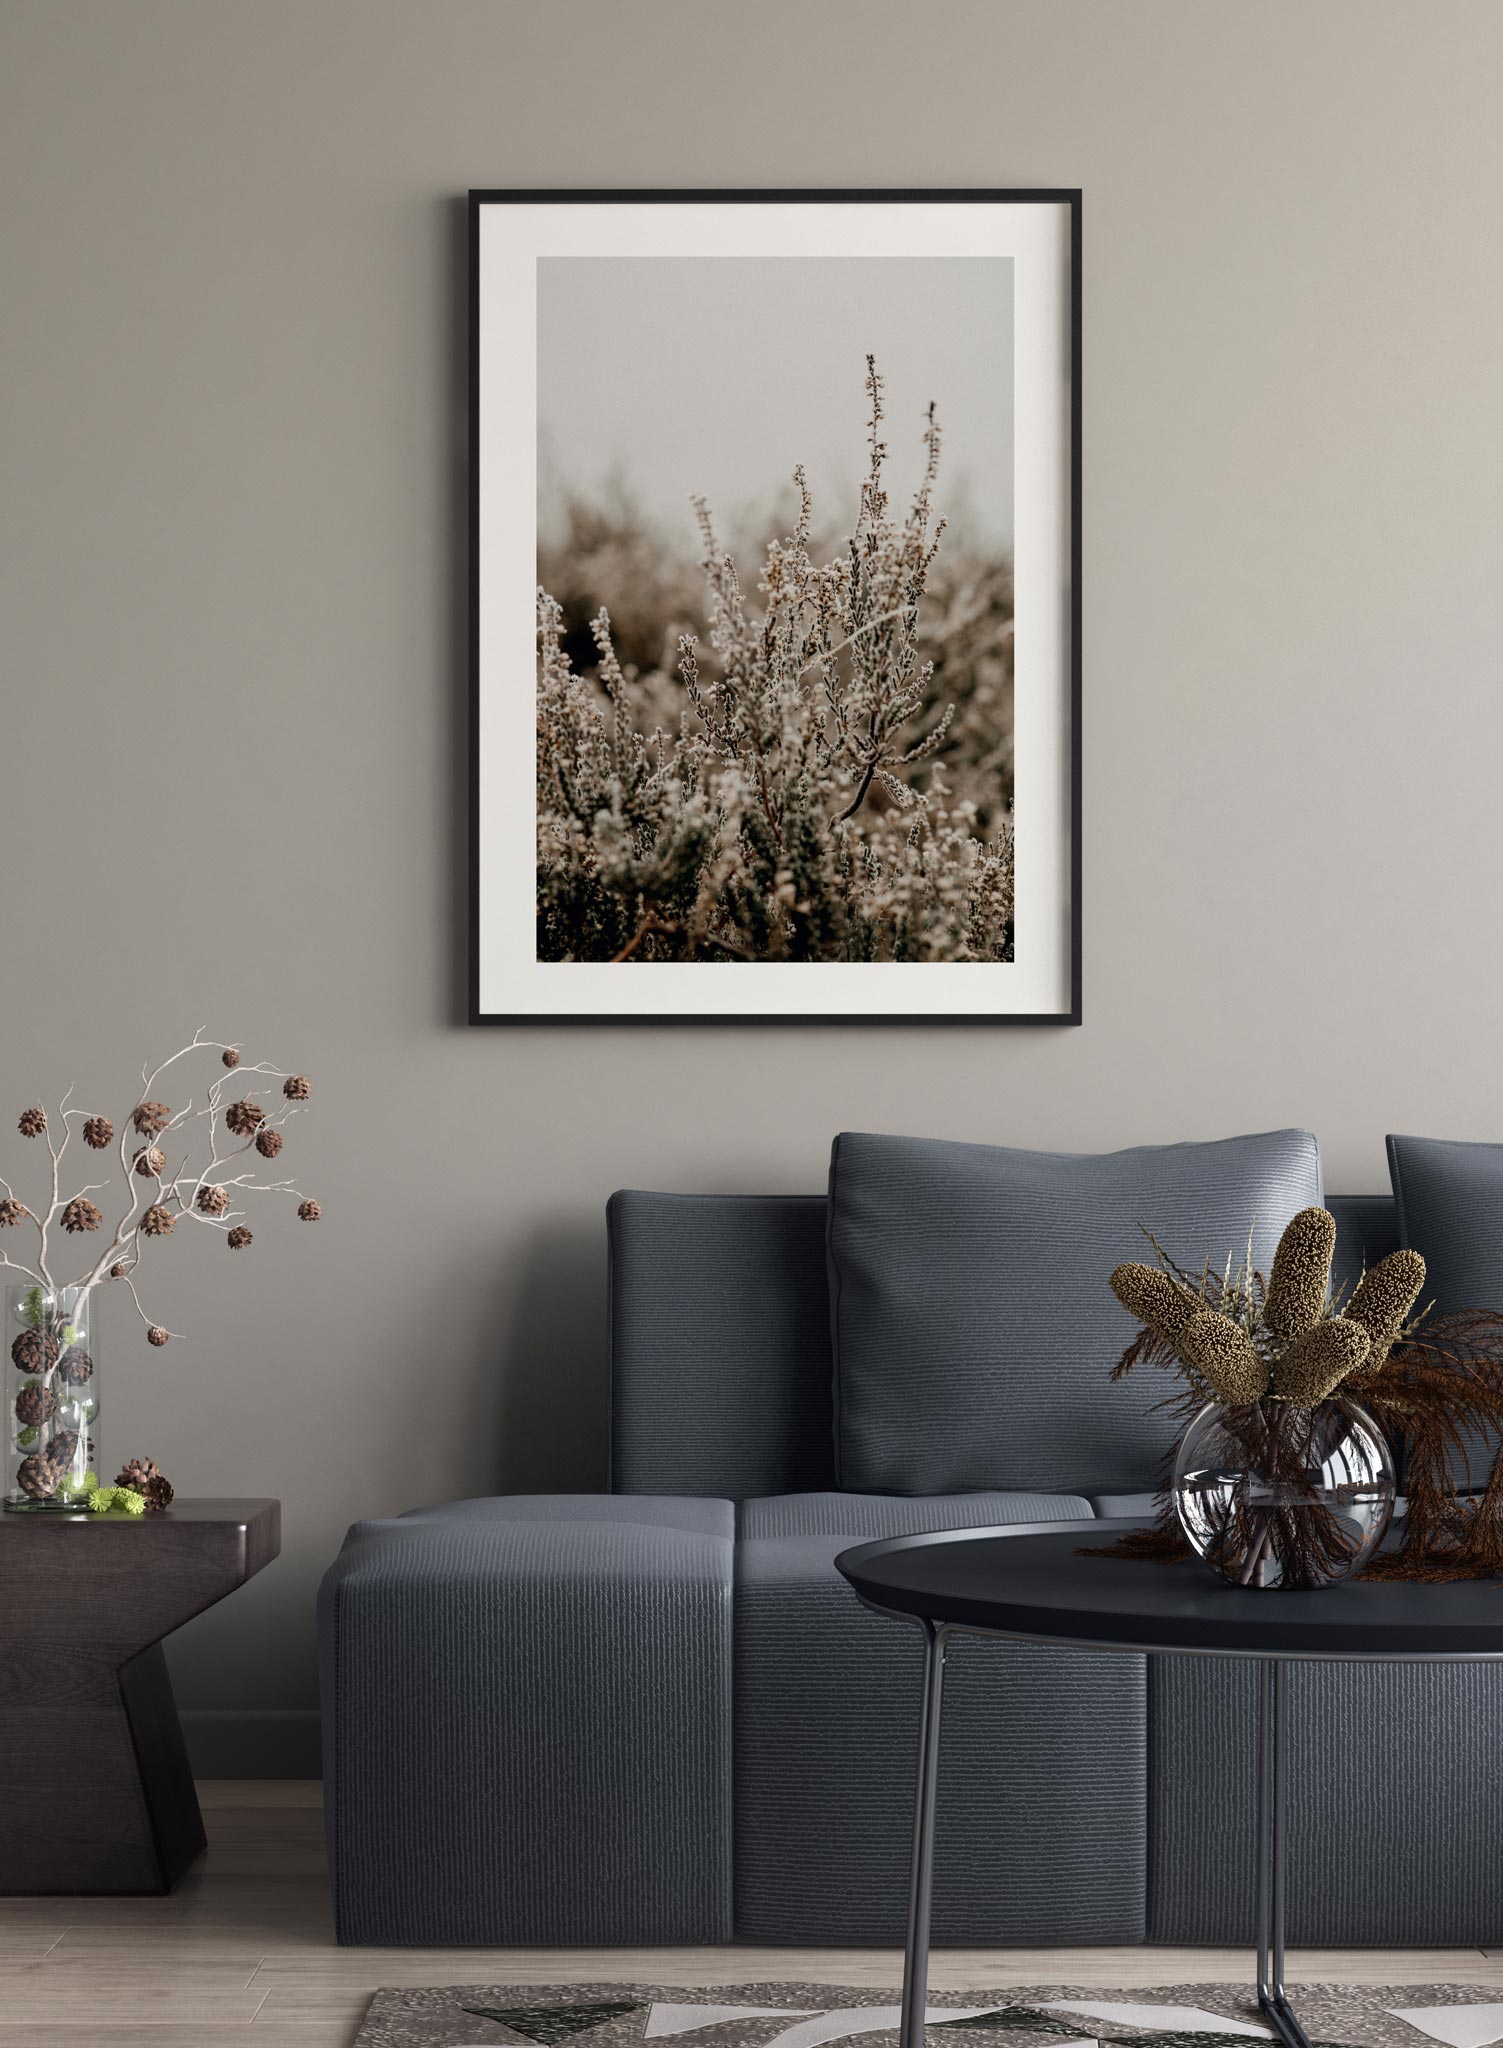 "Silvery Seedheads" is a botanical photography poster by Opposite Wall of branches covered in tiny white flower blooms in a forest.